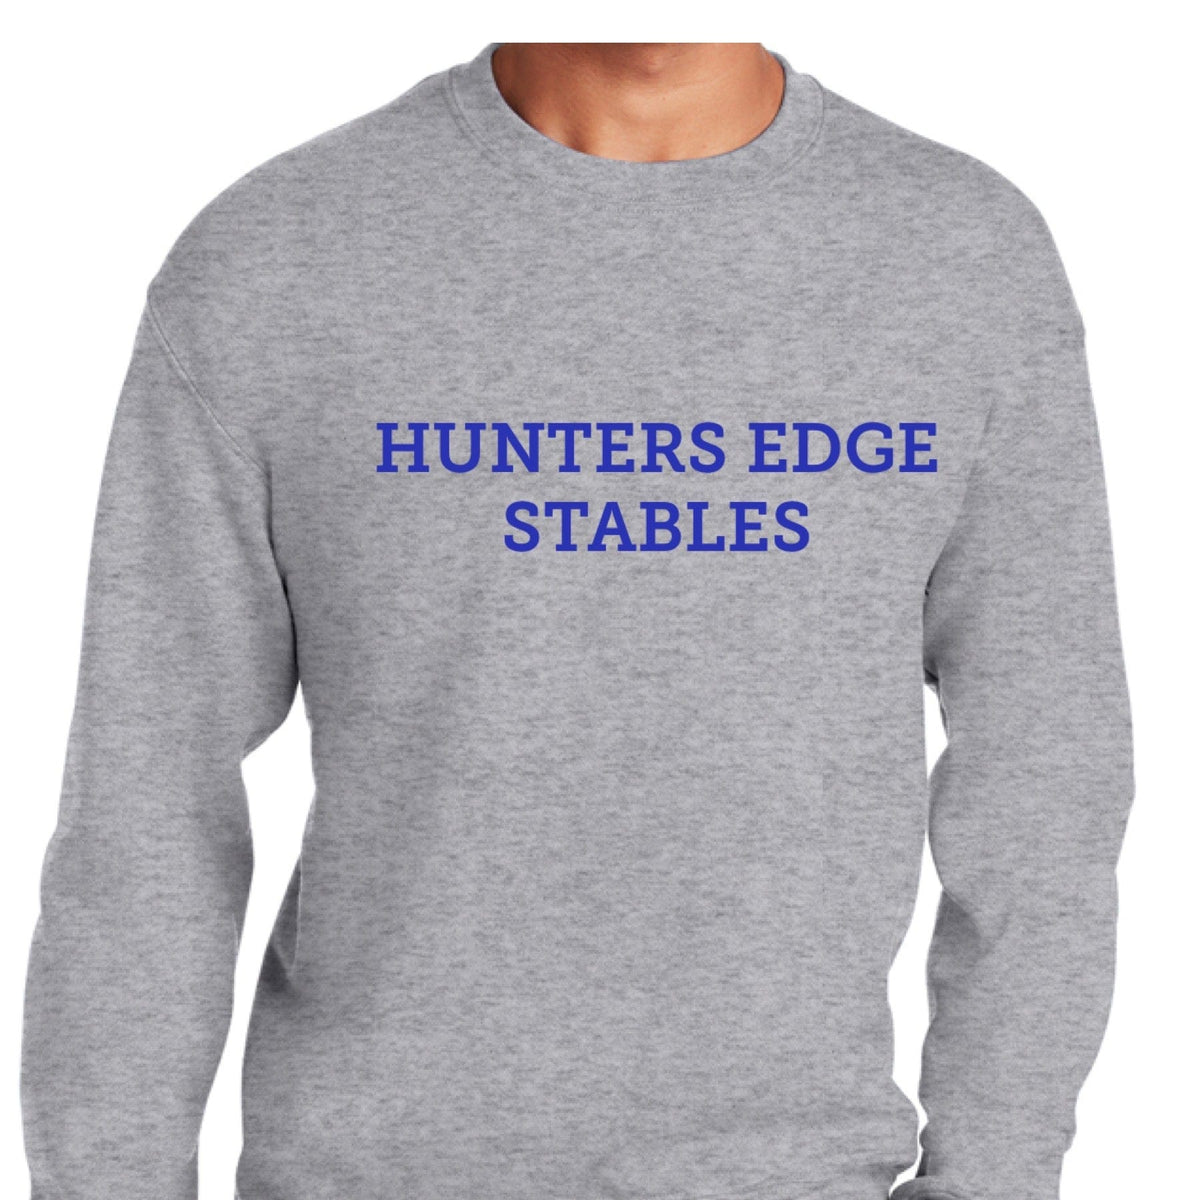 Equestrian Team Apparel Hunters Edge Stables Sweatshirt and Hoodie equestrian team apparel online tack store mobile tack store custom farm apparel custom show stable clothing equestrian lifestyle horse show clothing riding clothes horses equestrian tack store